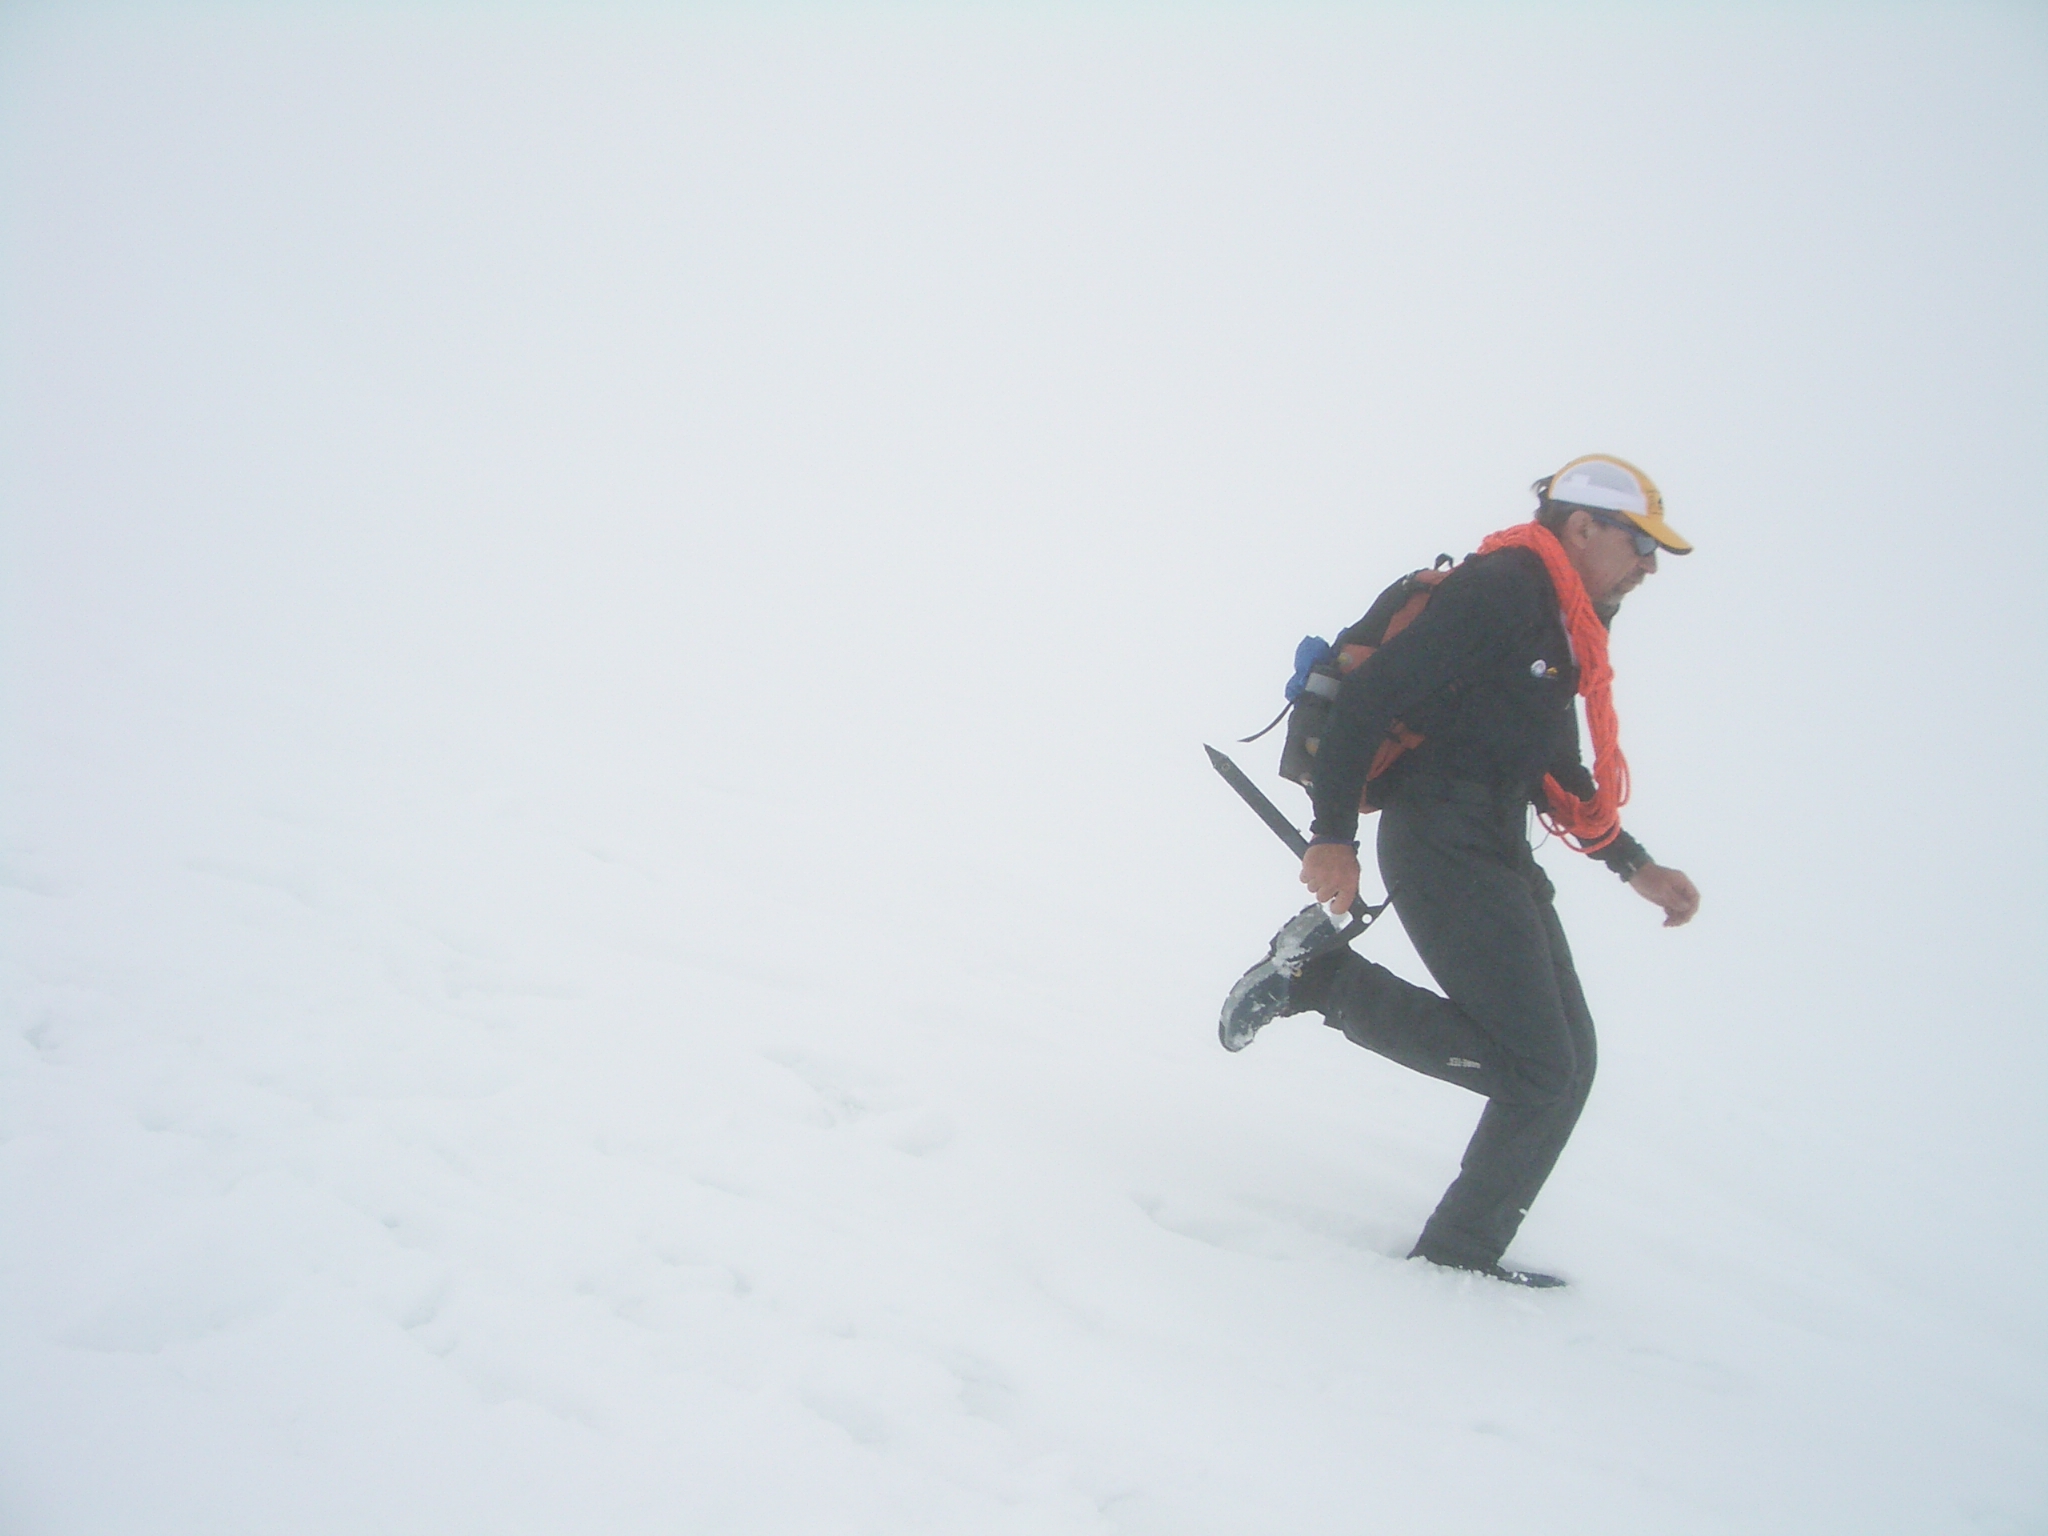 Buzz Burrell runs down a snowfield on Mt. Rainier in a white-out. He's carrying an ice axe and shouldering a cord of rope.